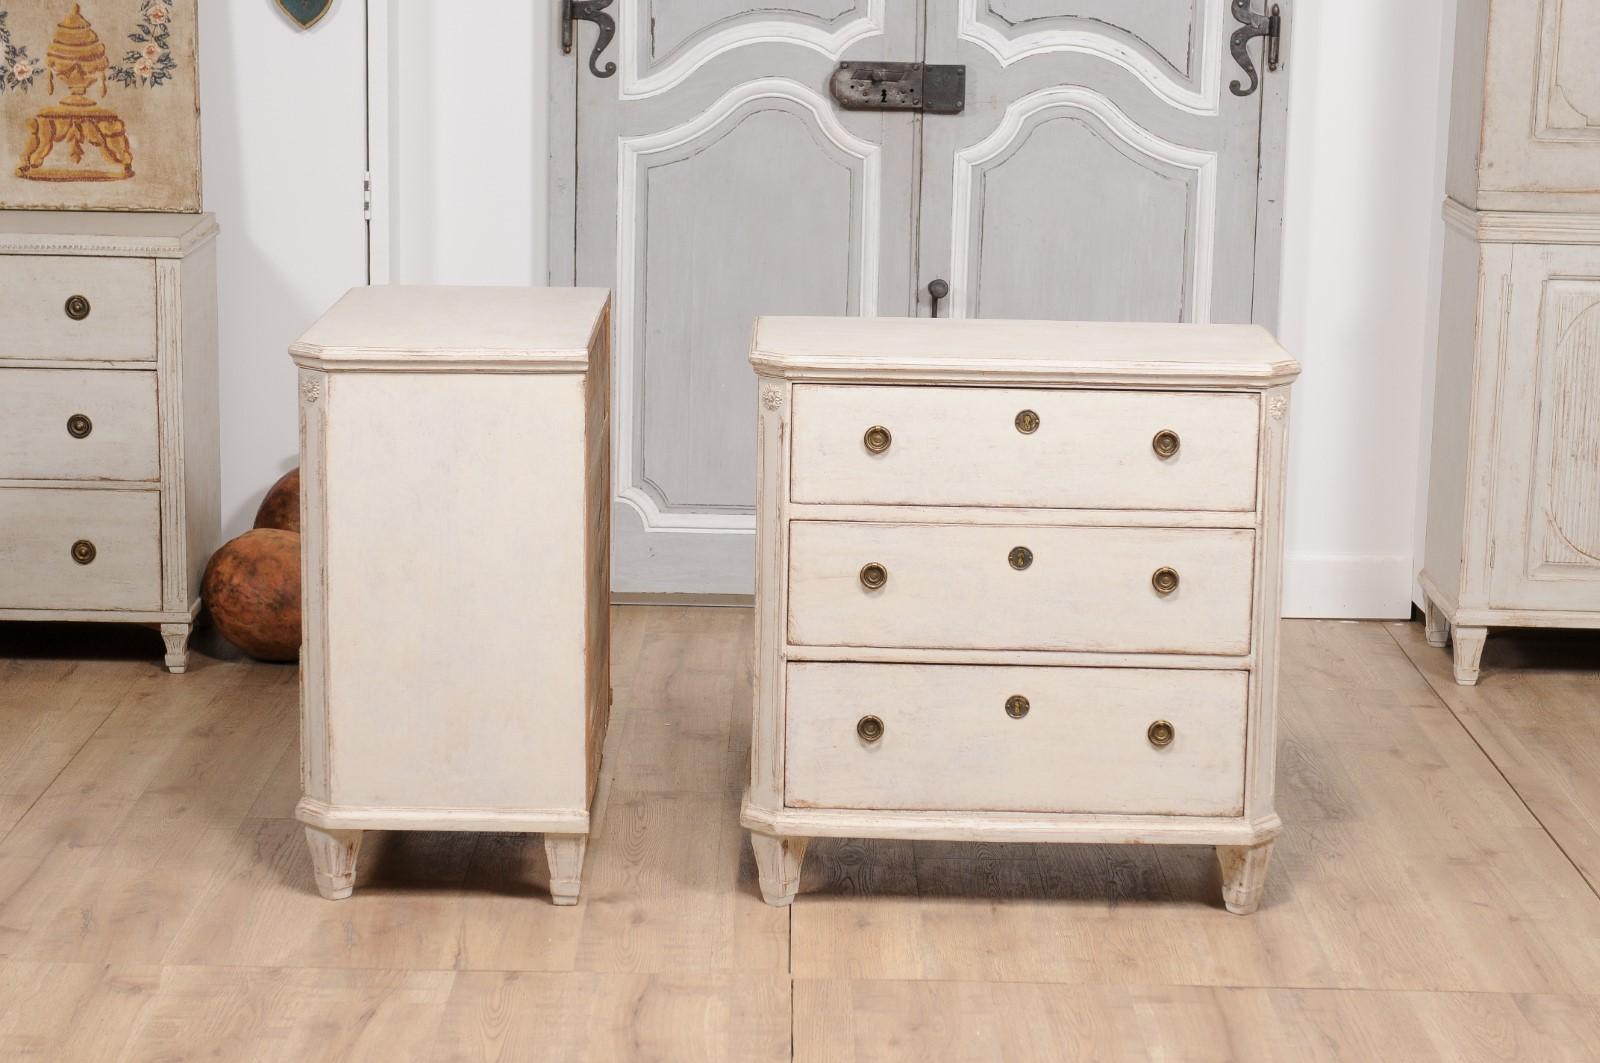 19th Century Swedish Gustavian Style Painted Three-Drawer Chests, a Pair For Sale 7